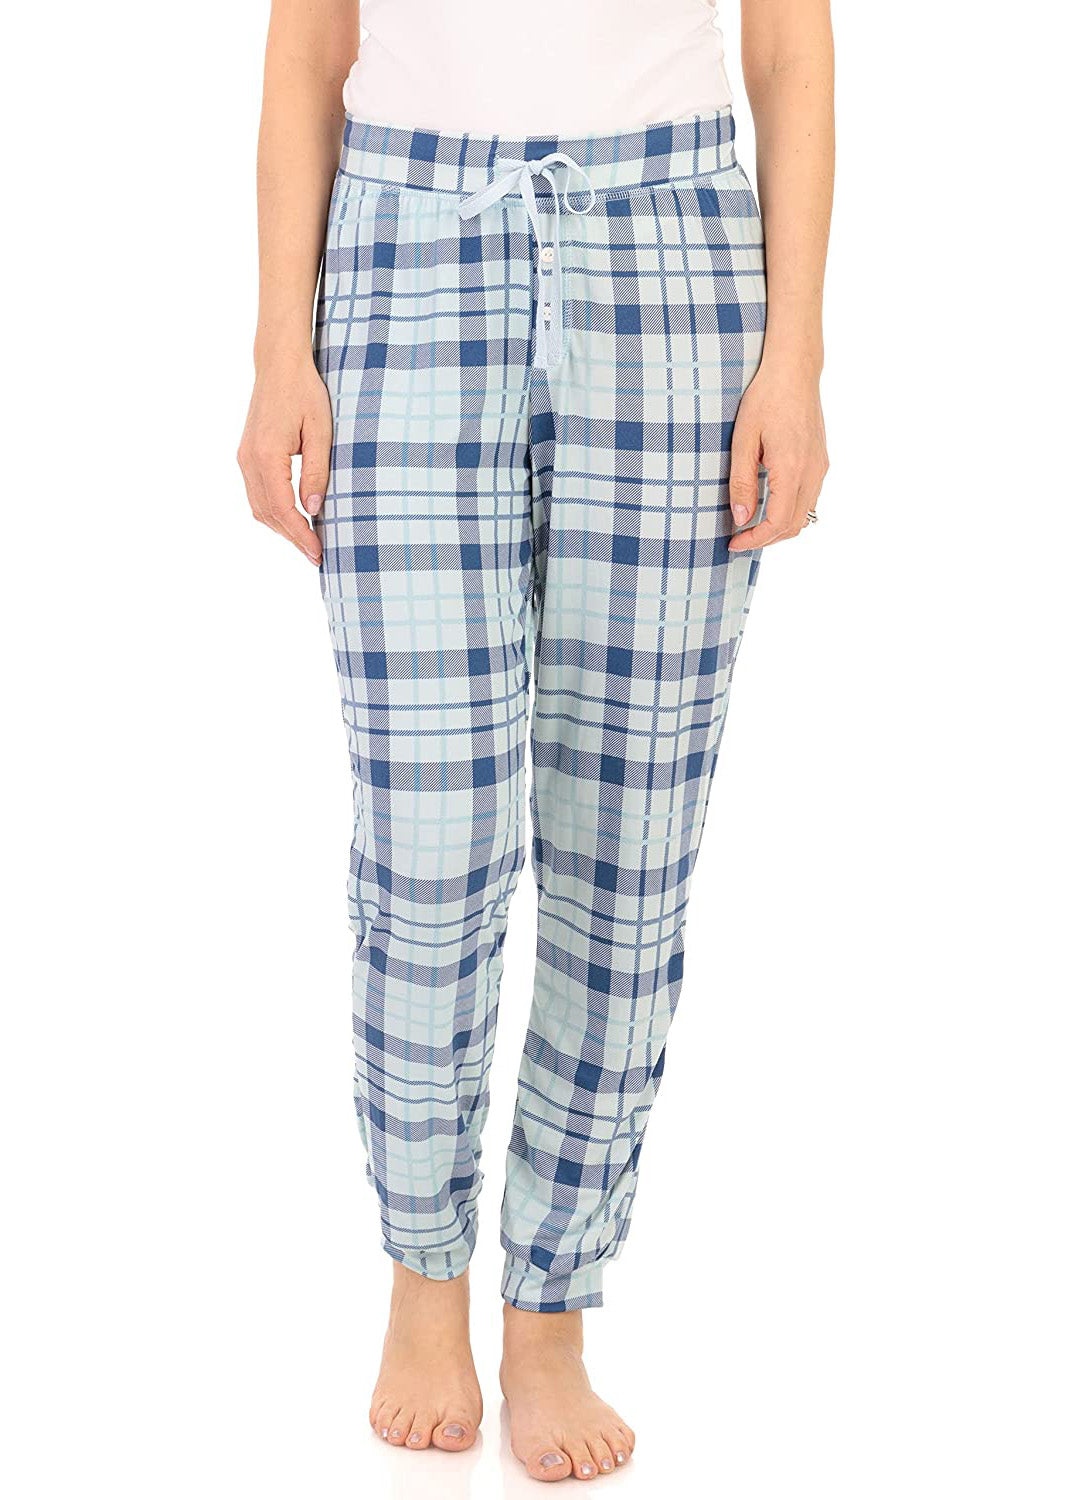 PJ joggers with soft velvety texture, stretch, elastic waistband, drawstring, and stylish ankle cuff. This pattern is a blue, light blue plaid. The waist and the cuffs match the rest of the garment.